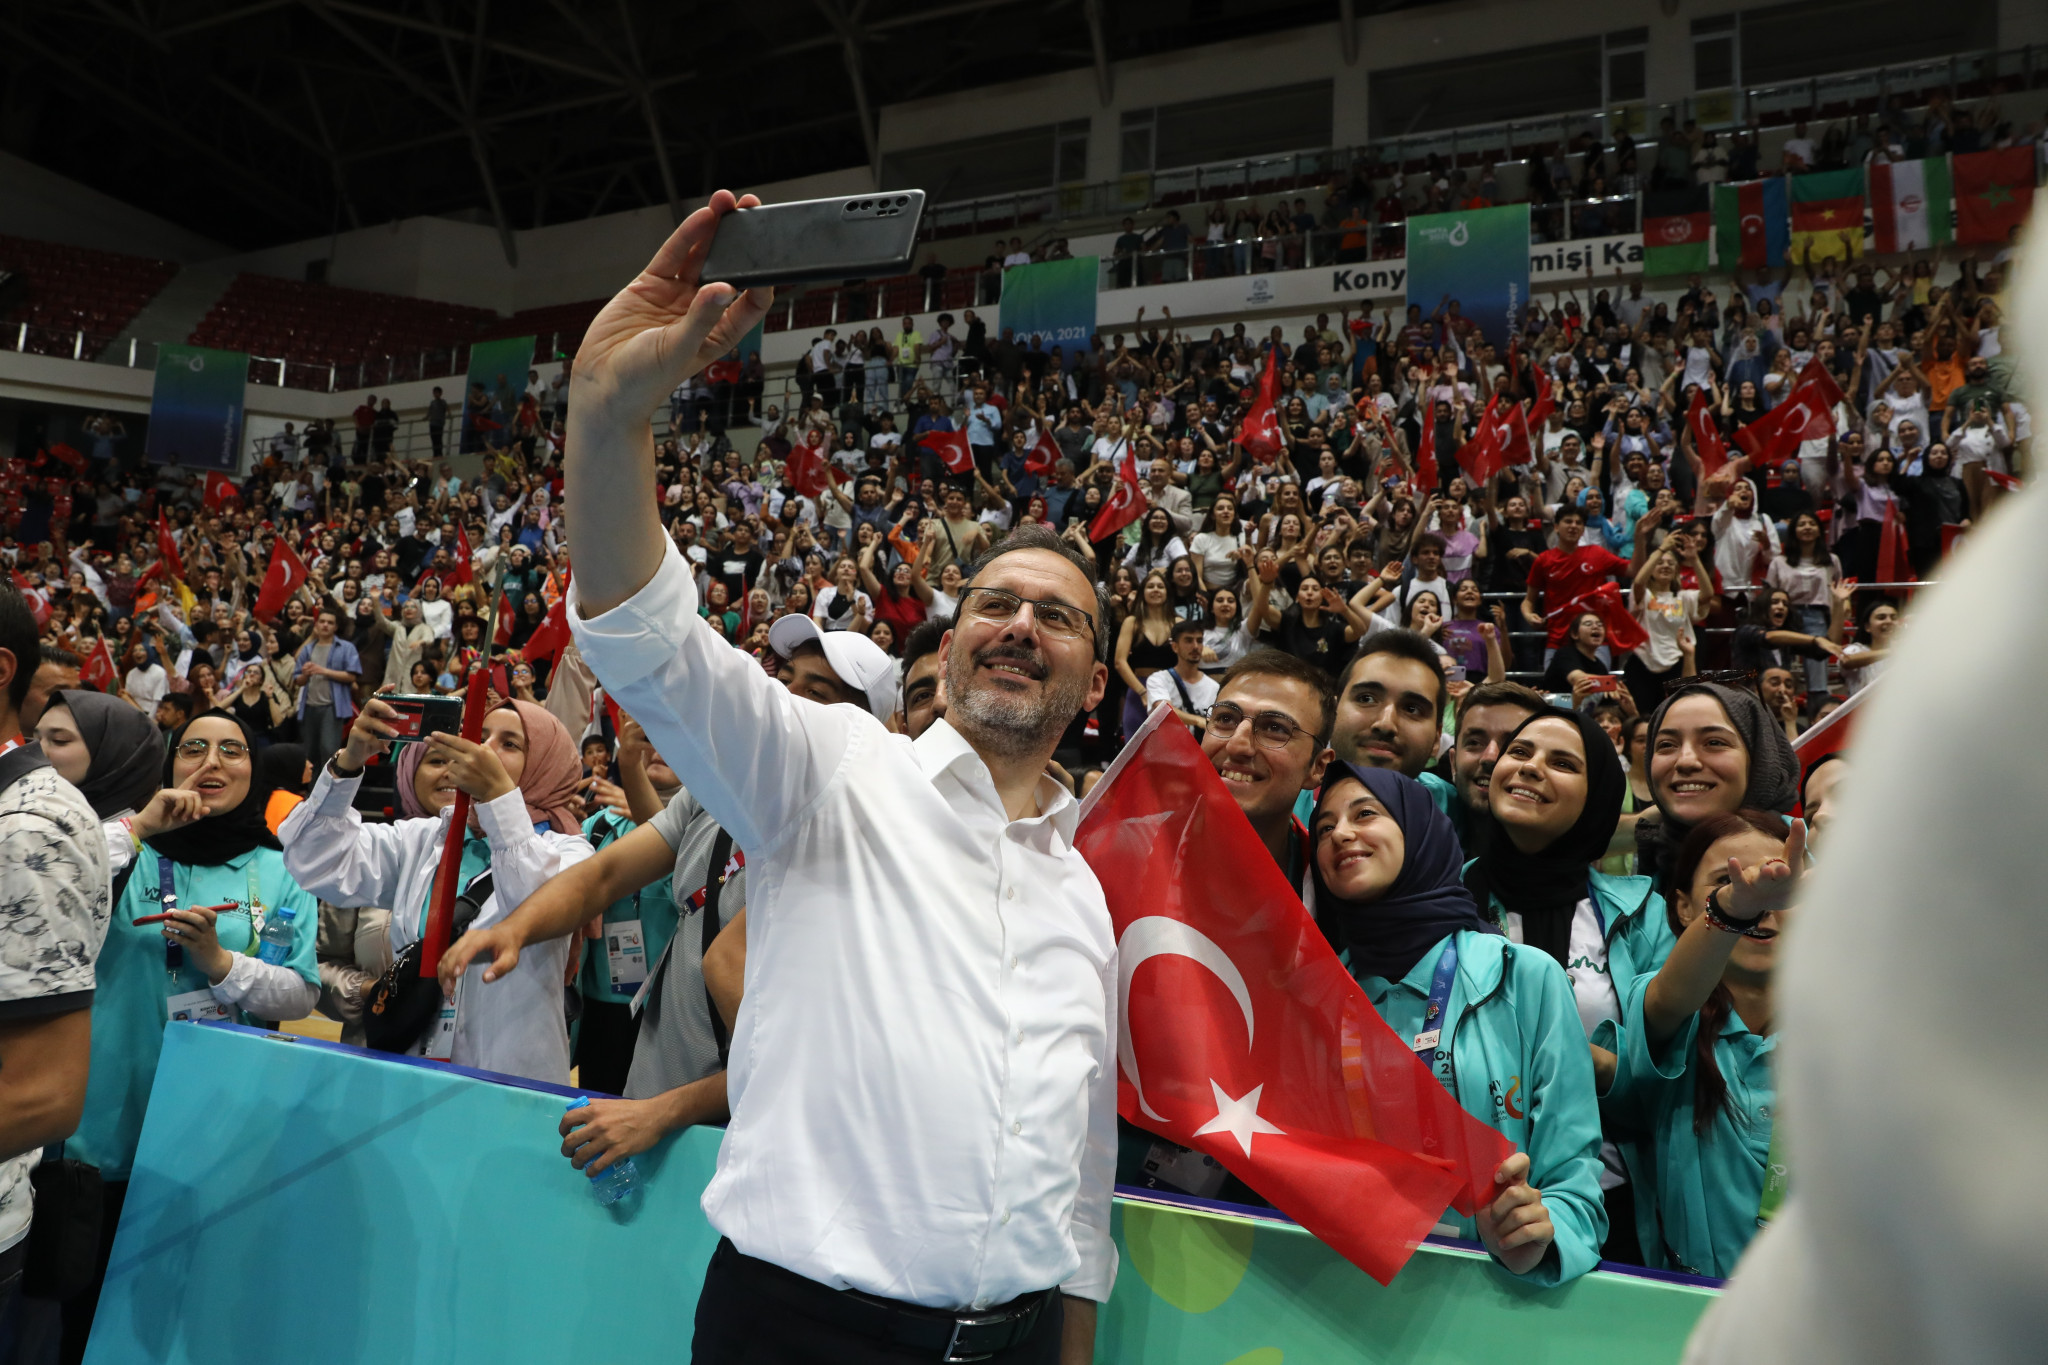 Turkish Sports Minister Mehmet Kasapoğlu has claimed his country has 